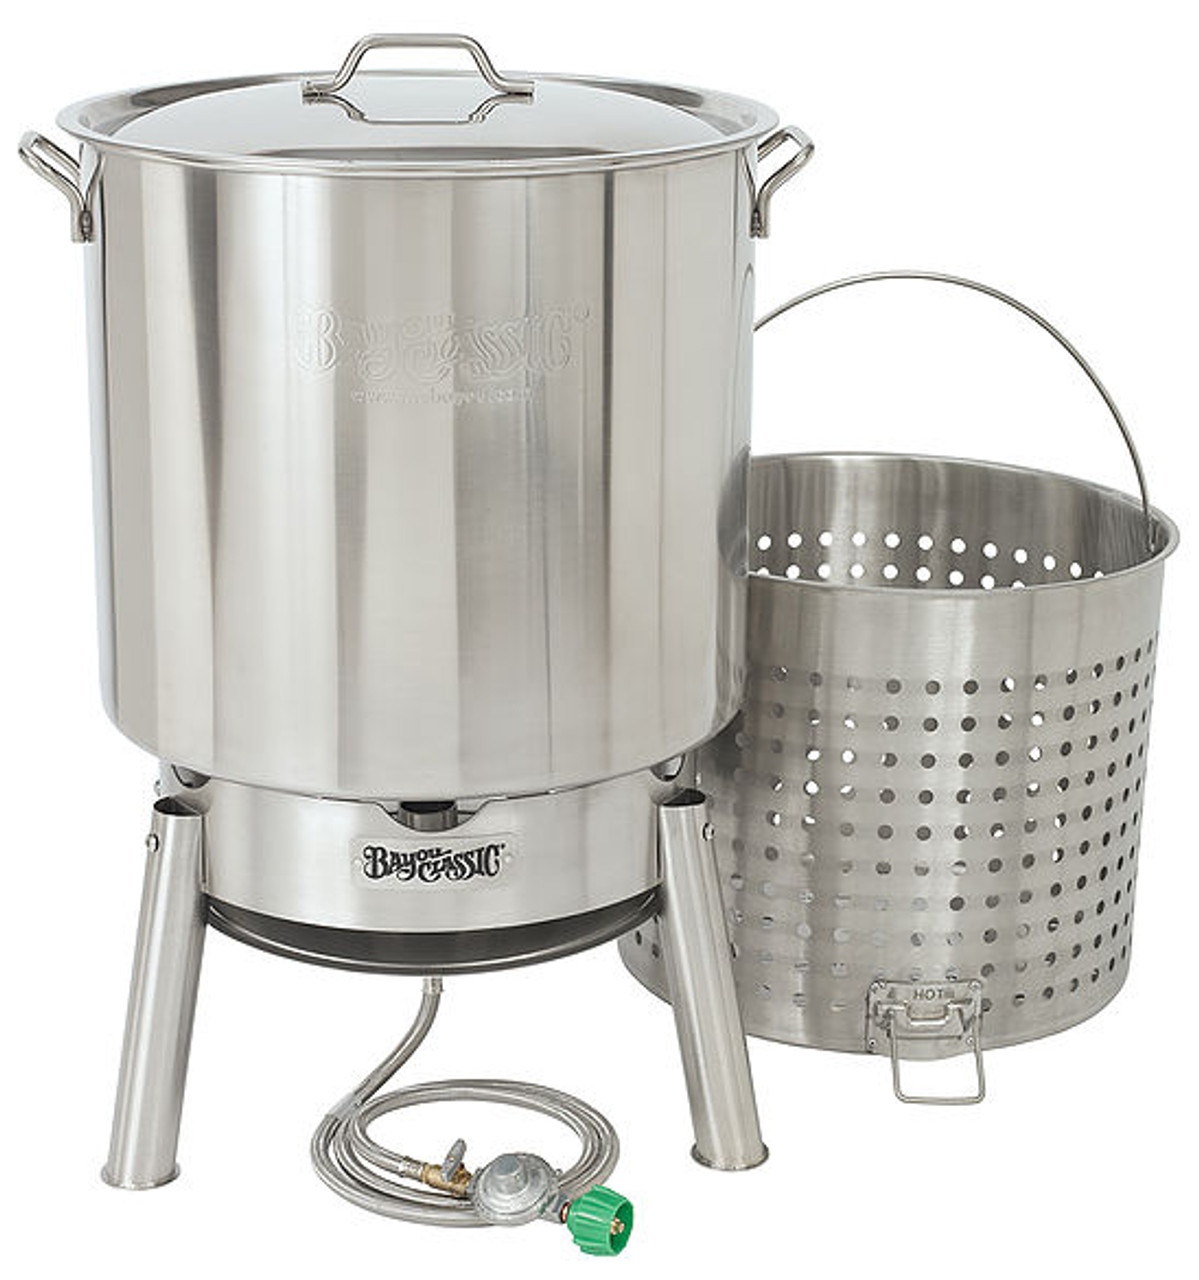 Boiling and Steaming Cooker Package with 50 Qt. Pot and Steam